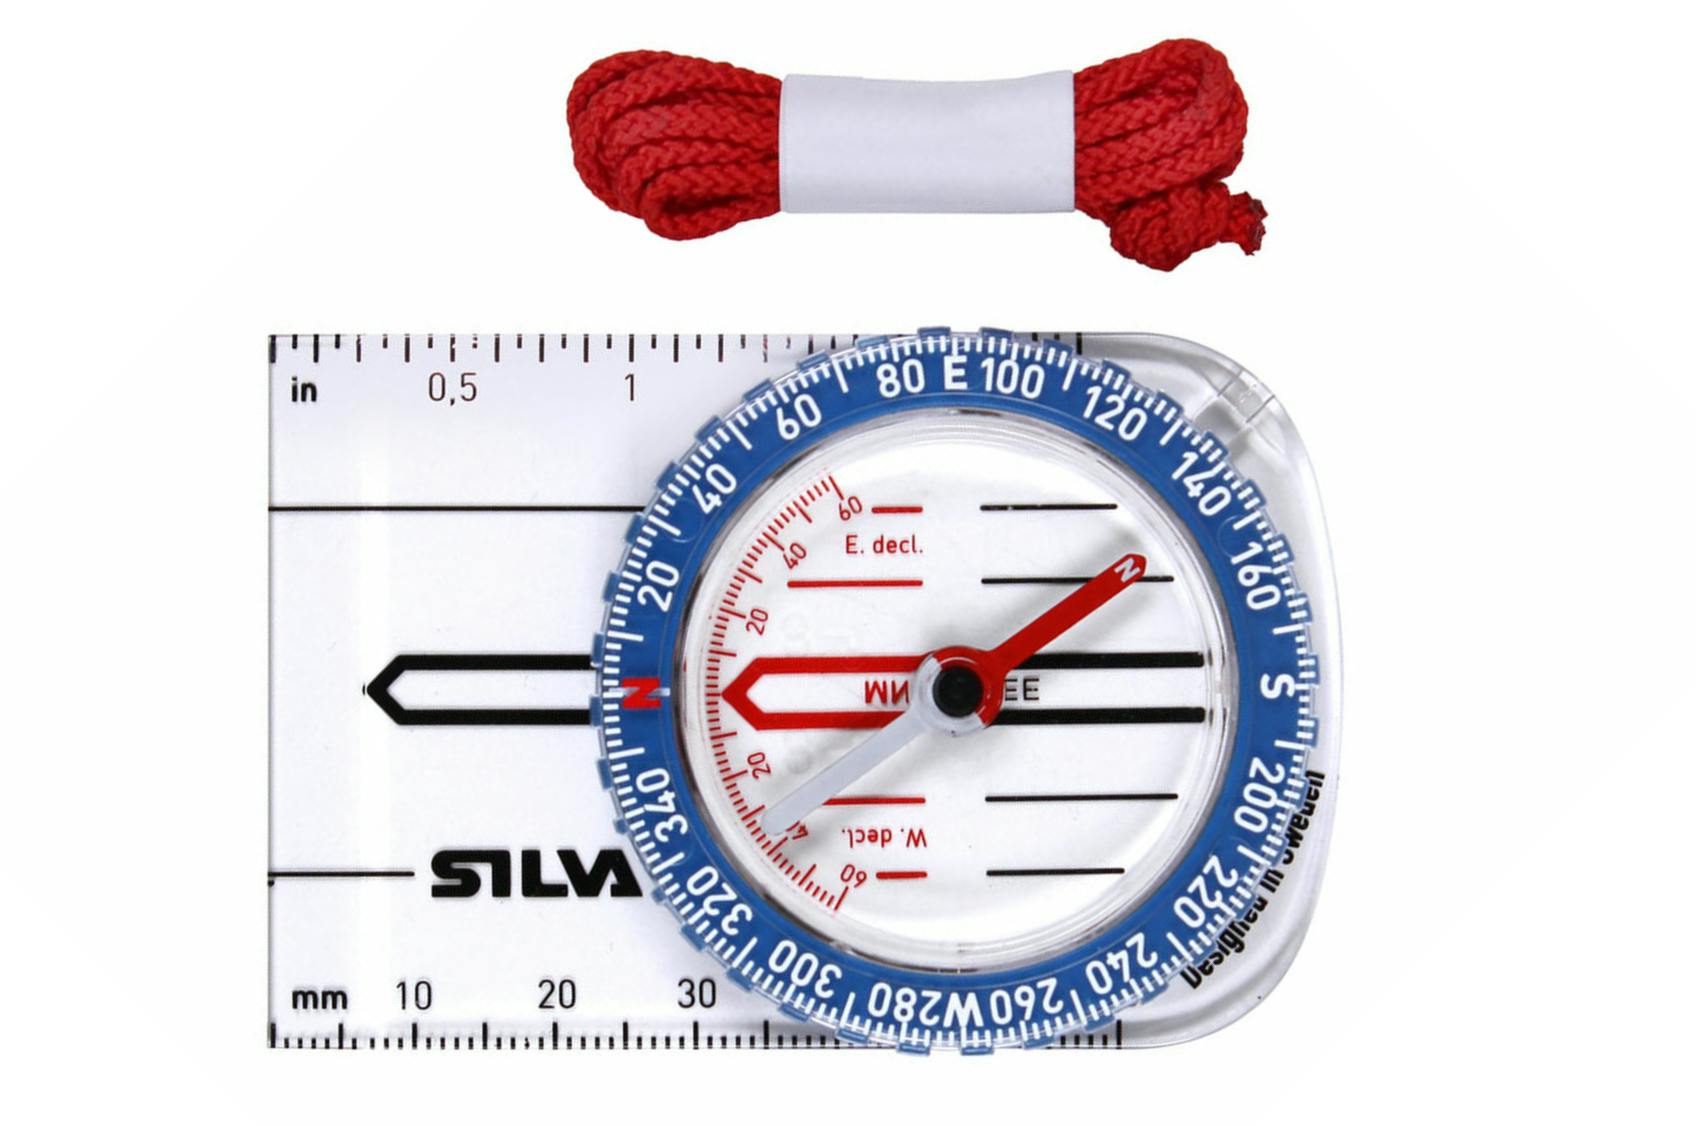 Product image of the Silva Starter #1-2-3 Compass.